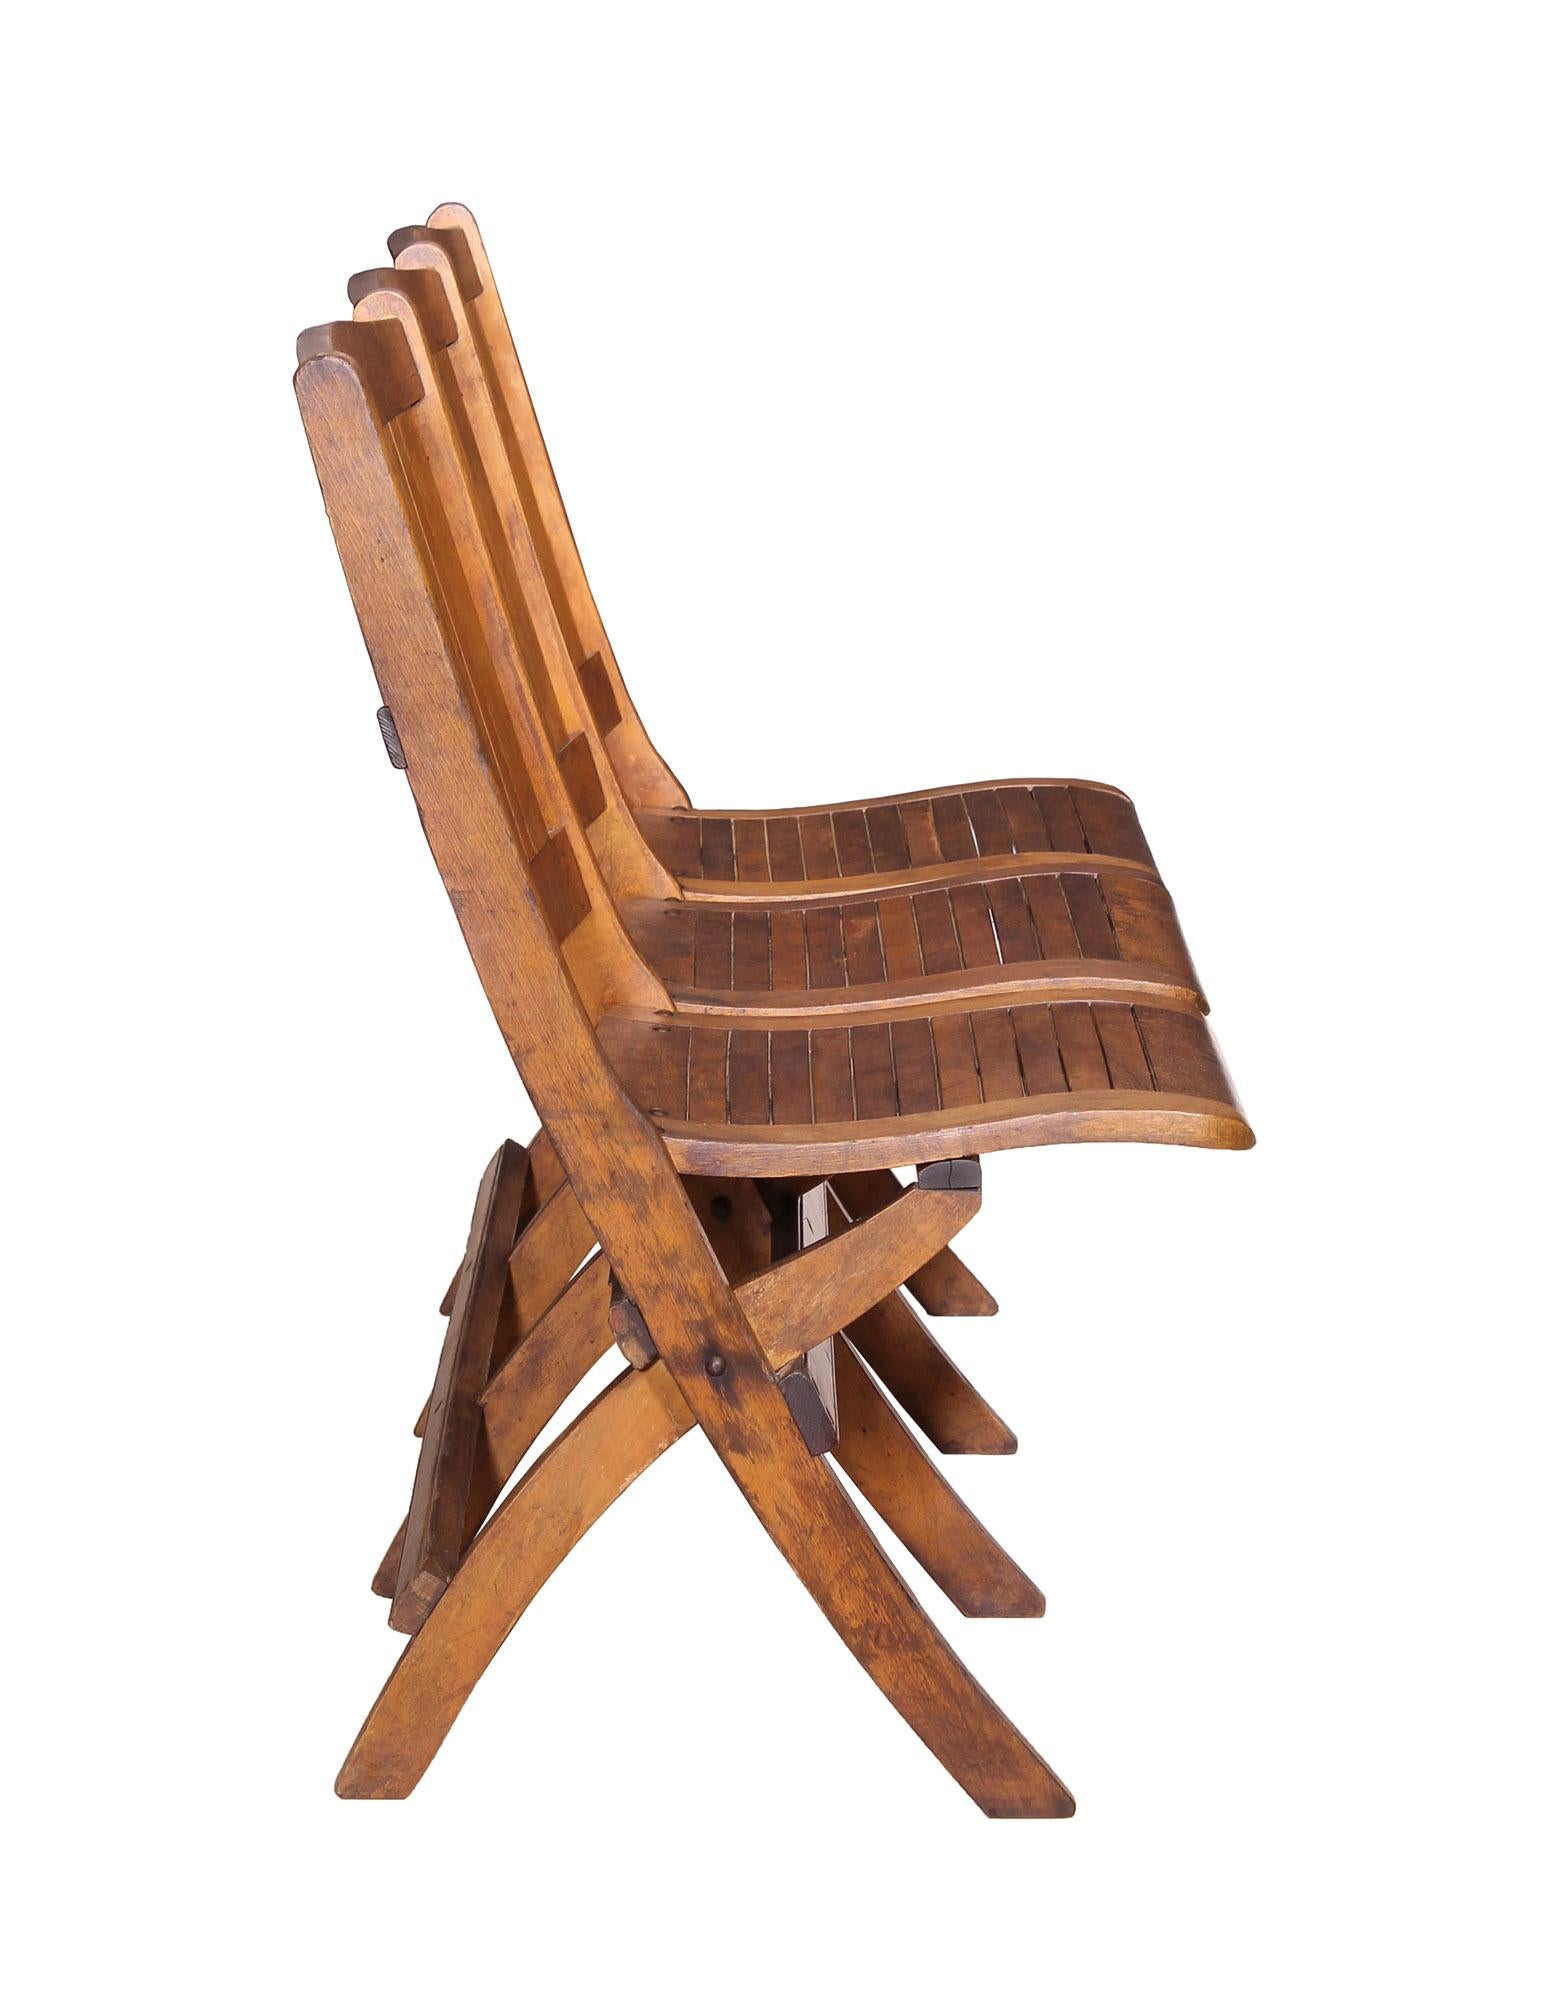 American Classical Bank of Folding Chairs / Bench